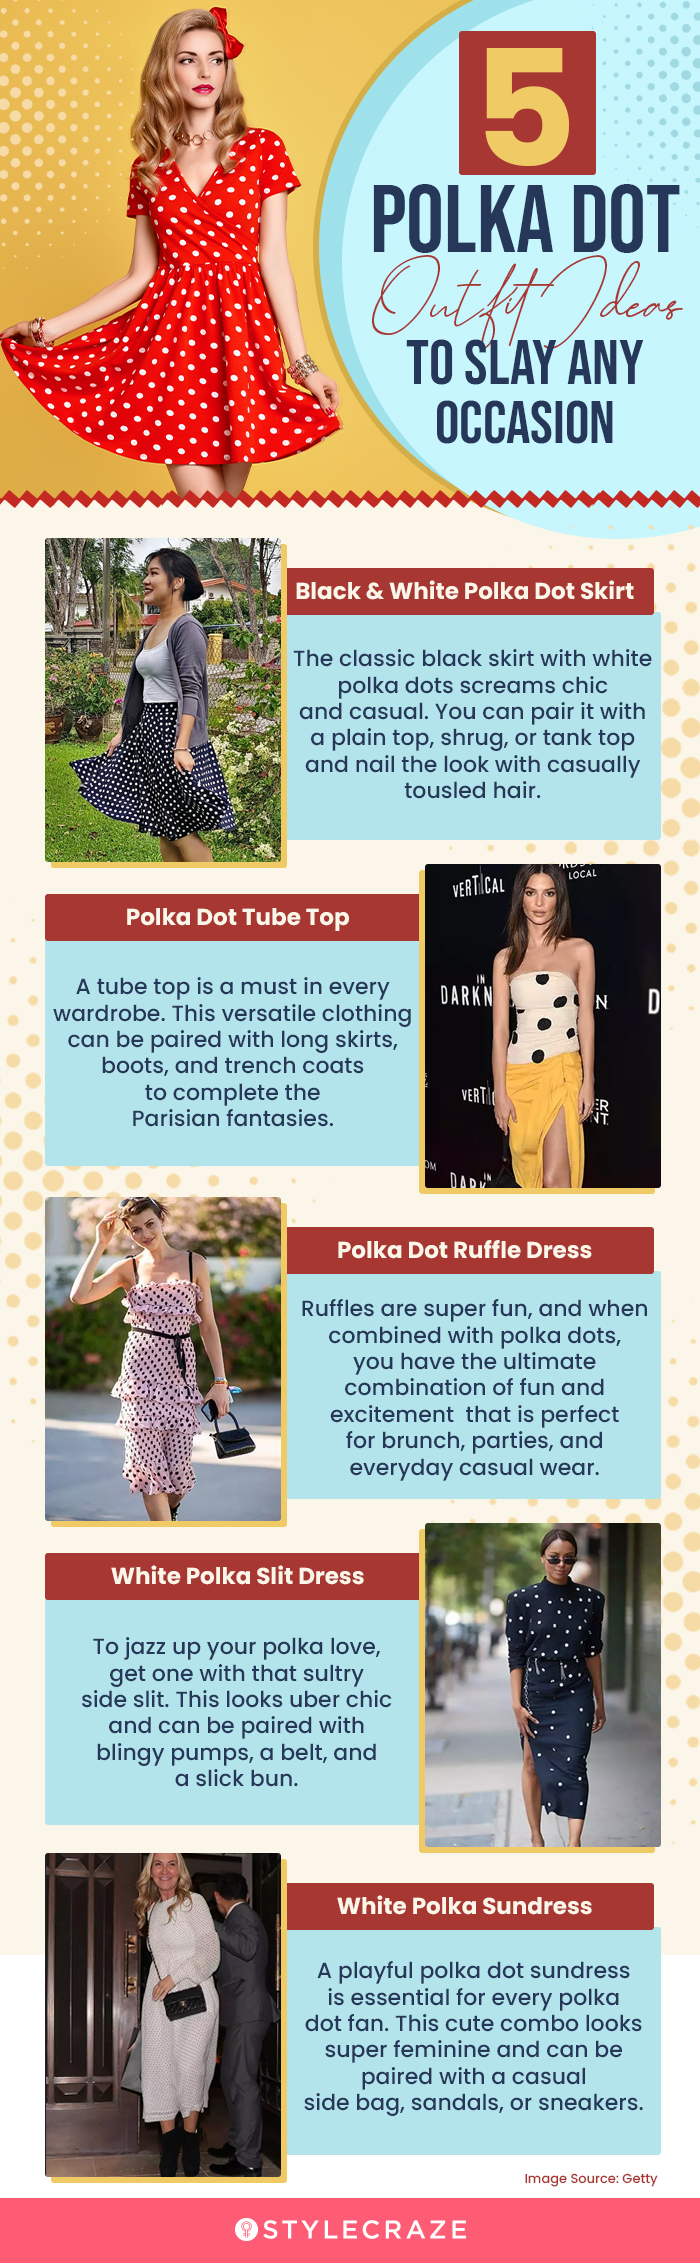 5 polka dot outfit ideas to slay any occasion (infographic)